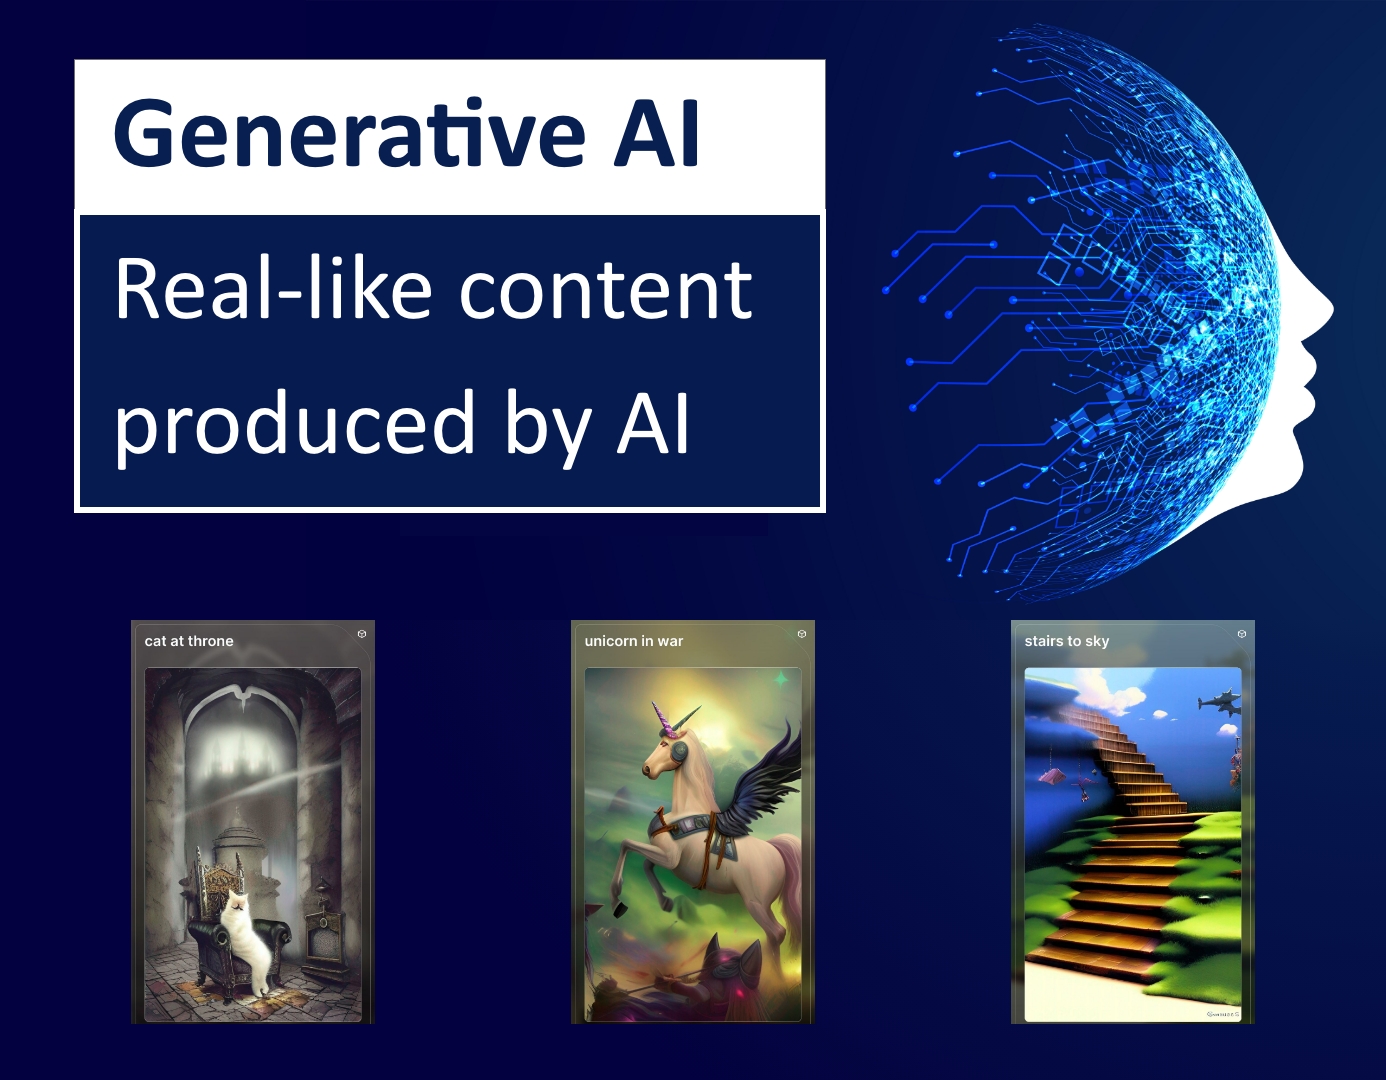 Graphic symbolizing Generative AI's potential to create lifelike content, bridging human and AI capabilities.